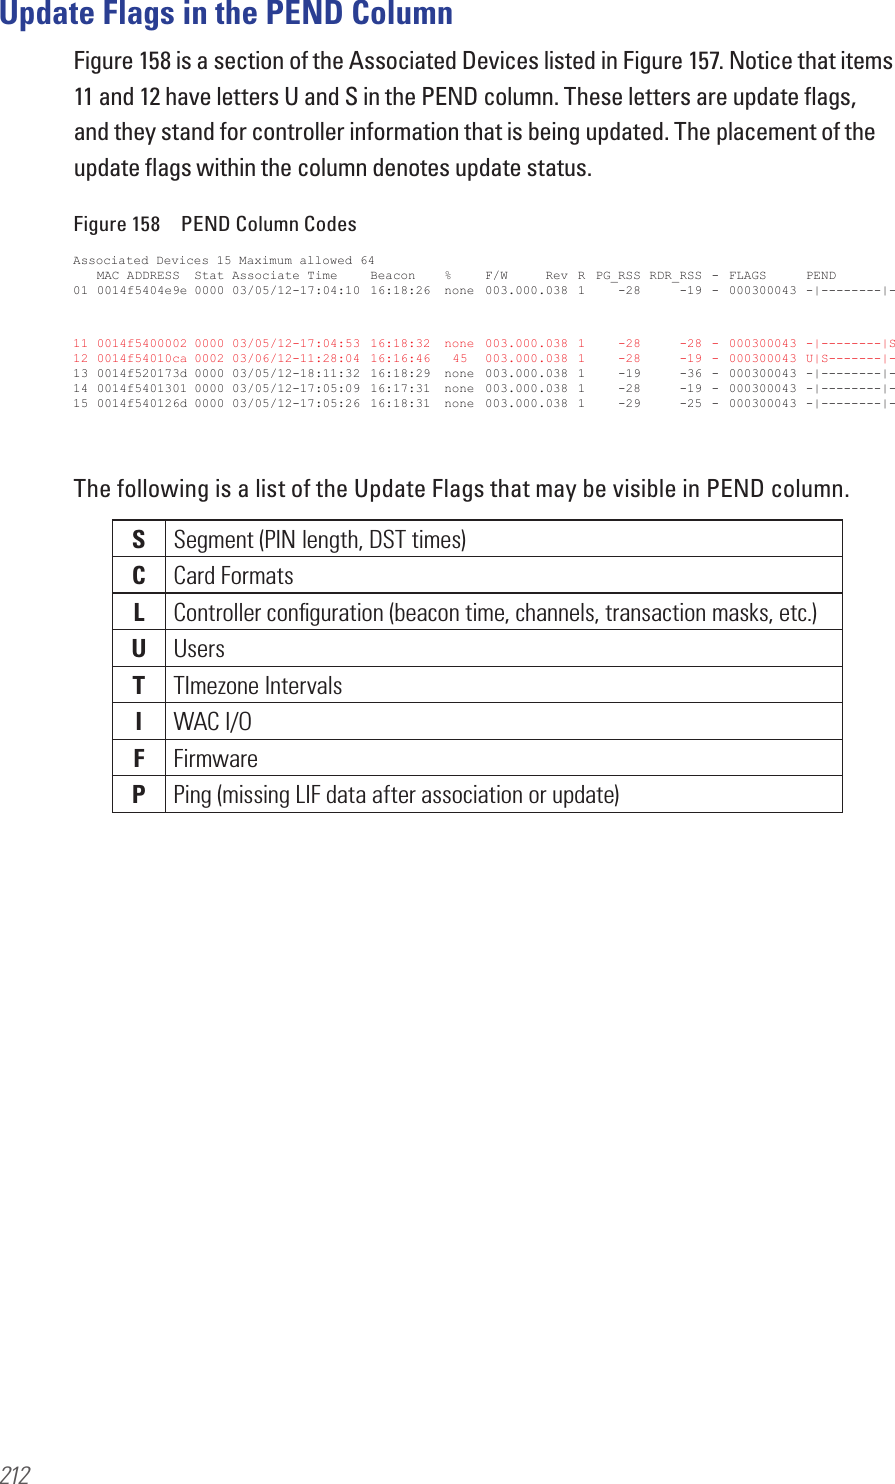 212Update Flags in the PEND ColumnFigure 158 is a section of the Associated Devices listed in Figure 157. Notice that items 11 and 12 have letters U and S in the PEND column. These letters are update ﬂags, and they stand for controller information that is being updated. The placement of the update ﬂags within the column denotes update status.Figure 158  PEND Column CodesThe following is a list of the Update Flags that may be visible in PEND column.Associated Devices 15 Maximum allowed 64 MAC ADDRESS  Stat Associate Time  Beacon  %  F/W     Rev  R  PG_RSS RDR_RSS  -  FLAGS  PEND01 0014f5404e9e 0000 03/05/12-17:04:10  16:18:26  none  003.000.038  1  -28  -19  -  000300043 -|--------|-11 0014f5400002 0000 03/05/12-17:04:53  16:18:32  none  003.000.038  1  -28  -28  -  000300043 -|--------|S12 0014f54010ca 0002 03/06/12-11:28:04  16:16:46  45  003.000.038  1  -28  -19  -  000300043 U|S-------|-13 0014f520173d 0000 03/05/12-18:11:32  16:18:29  none  003.000.038  1  -19  -36  -  000300043 -|--------|-14 0014f5401301 0000 03/05/12-17:05:09  16:17:31  none  003.000.038  1  -28  -19  -  000300043 -|--------|-15 0014f540126d 0000 03/05/12-17:05:26  16:18:31  none  003.000.038  1  -29  -25  -  000300043 -|--------|-SSegment (PIN length, DST times)CCard FormatsLController conﬁguration (beacon time, channels, transaction masks, etc.)UUsersTTImezone IntervalsIWAC I/OFFirmwarePPing (missing LIF data after association or update)